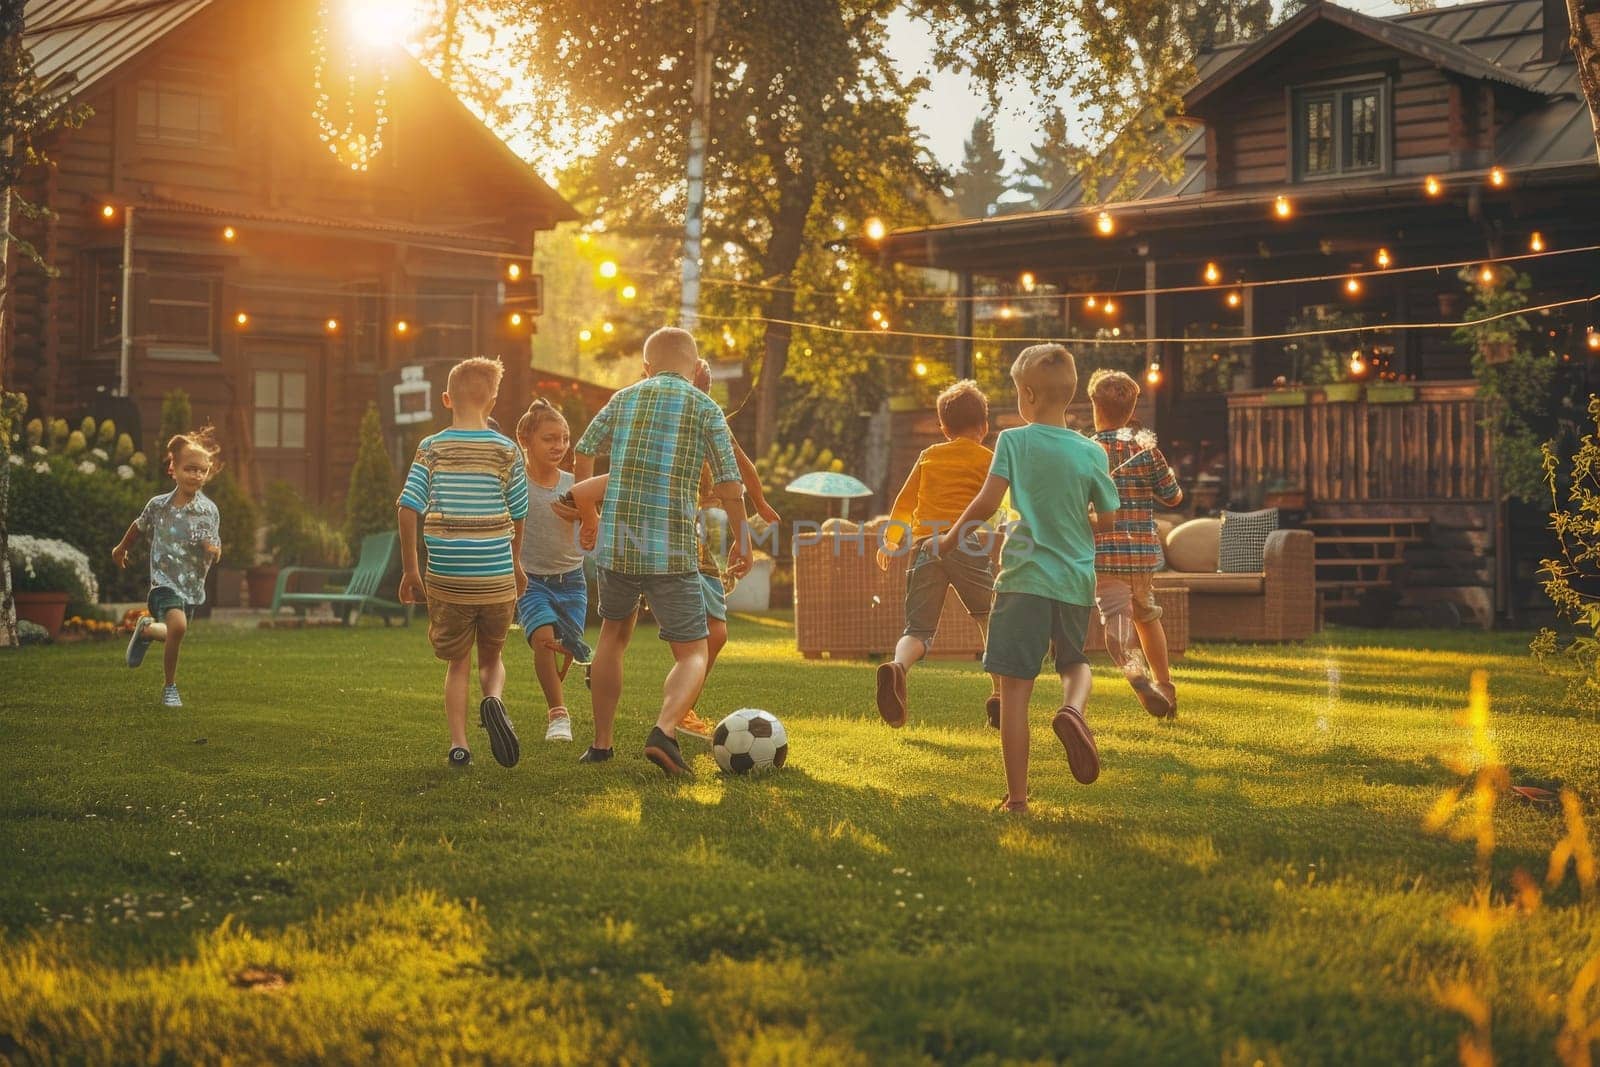 A group of children playing soccer in a yard. Scene is happy and energetic